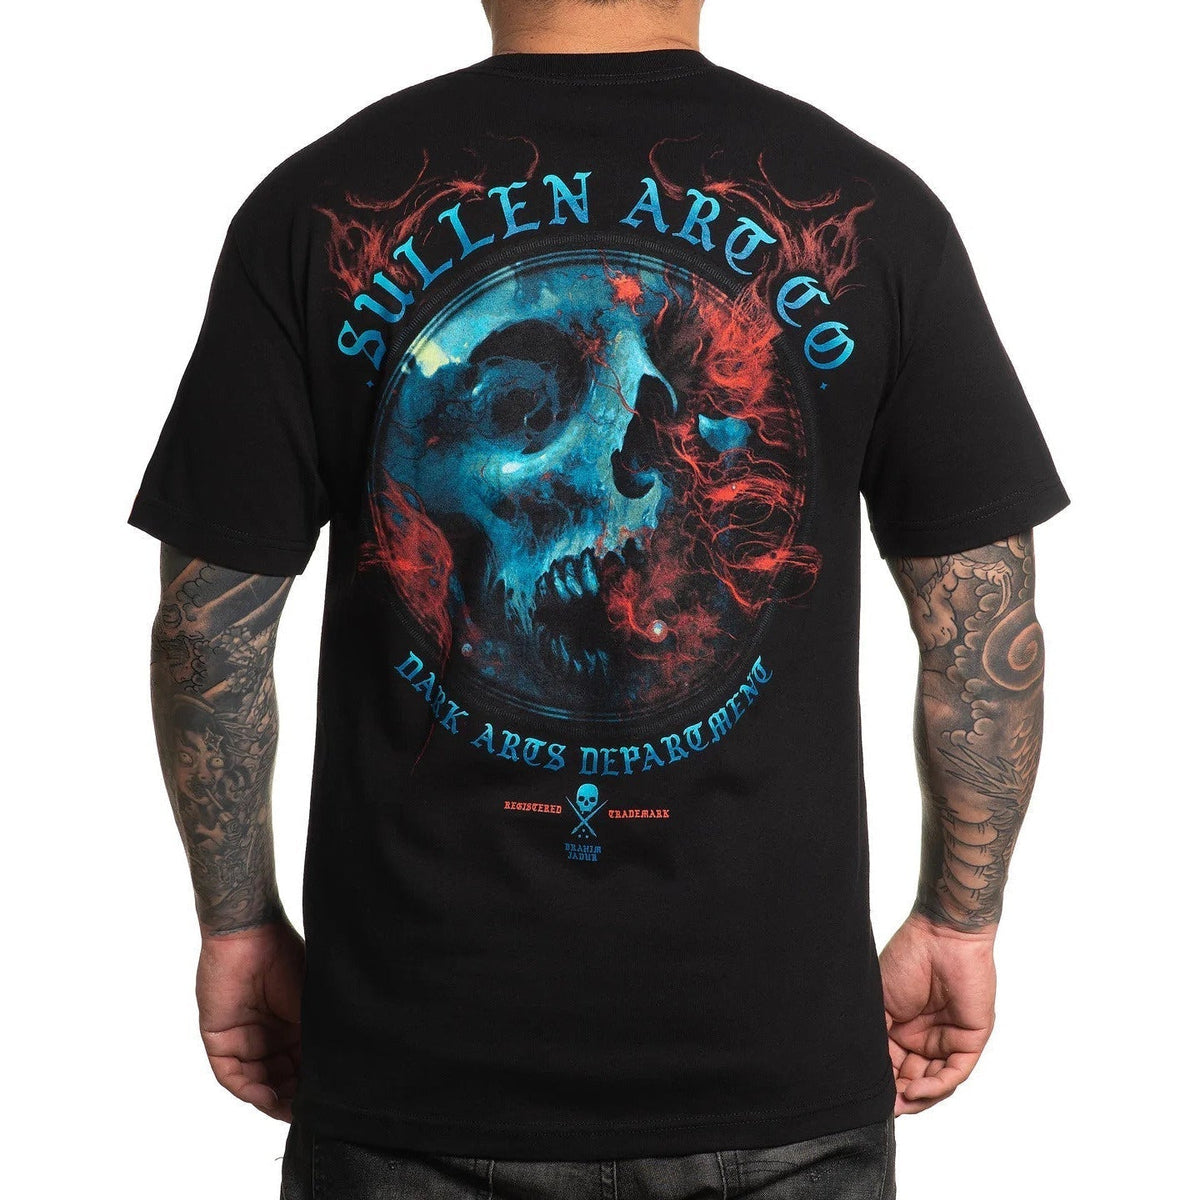 SULLEN-ART-COLLECTIVE-PORTAL-S/S-TEE - T-SHIRT - Synik Clothing - synikclothing.com